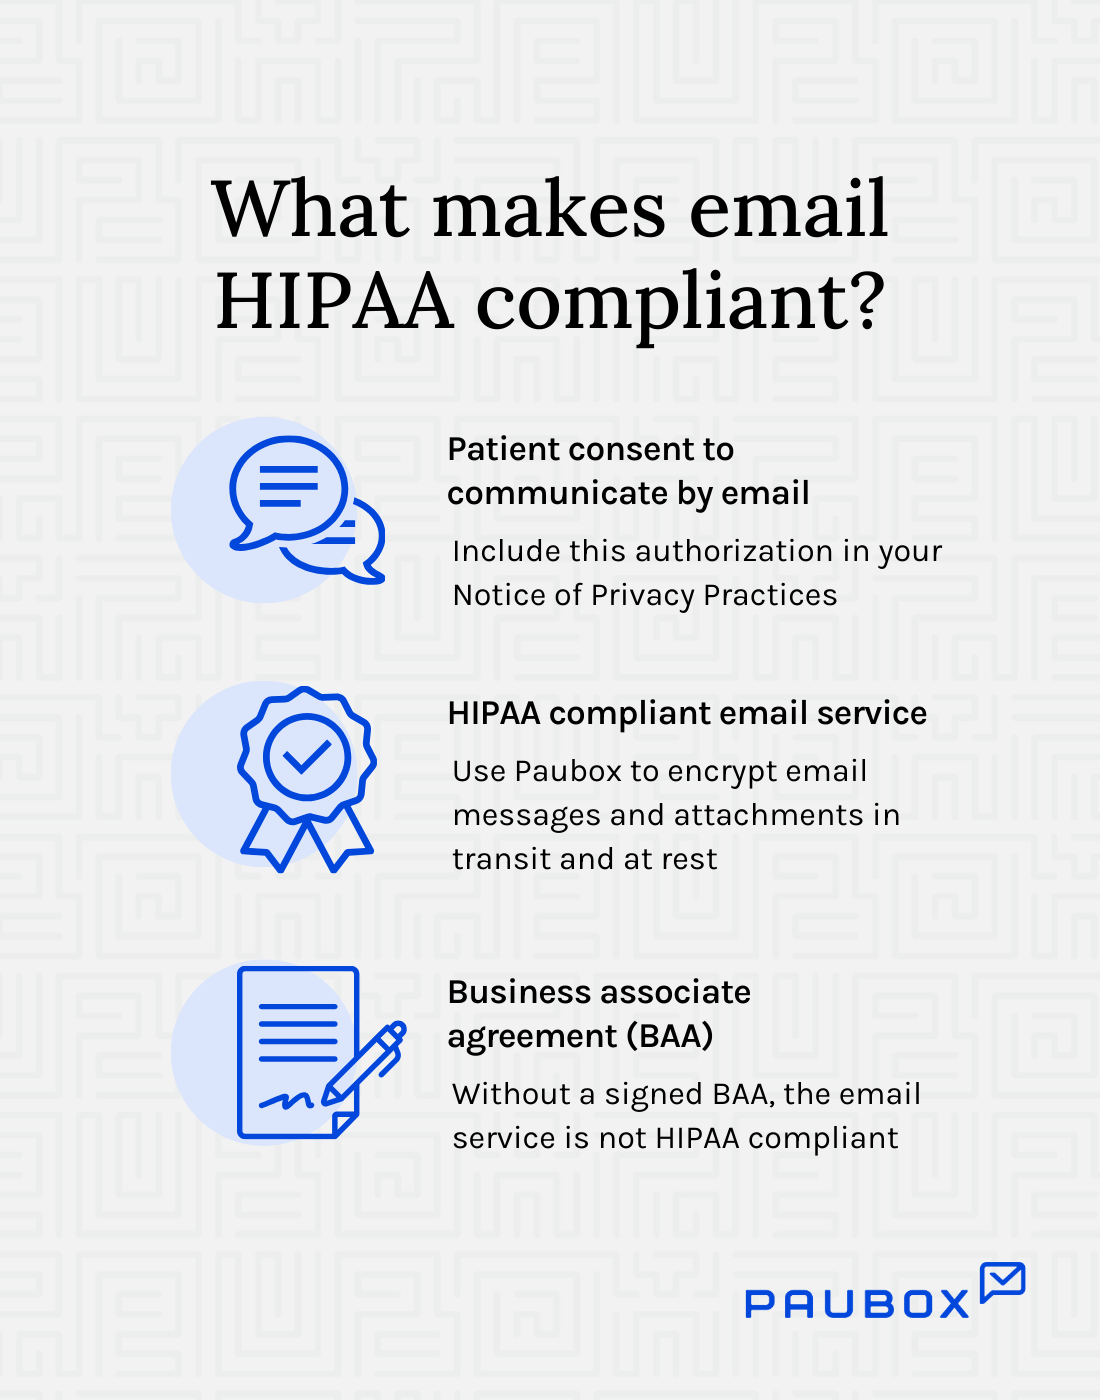 What makes email HIPAA compliant